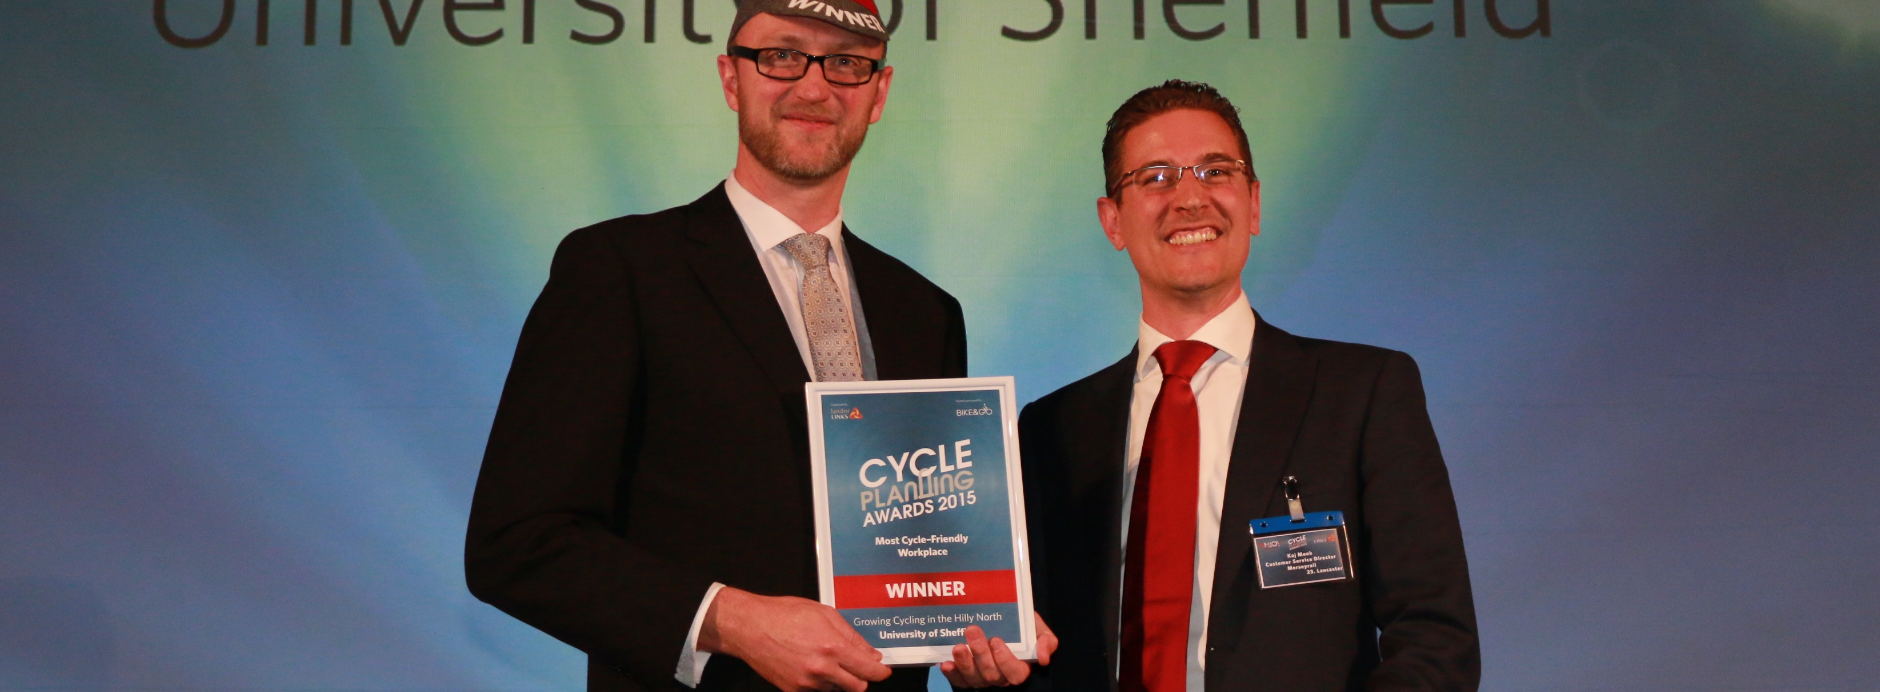 Winners AnnouncedCycle Planning Award in 2015